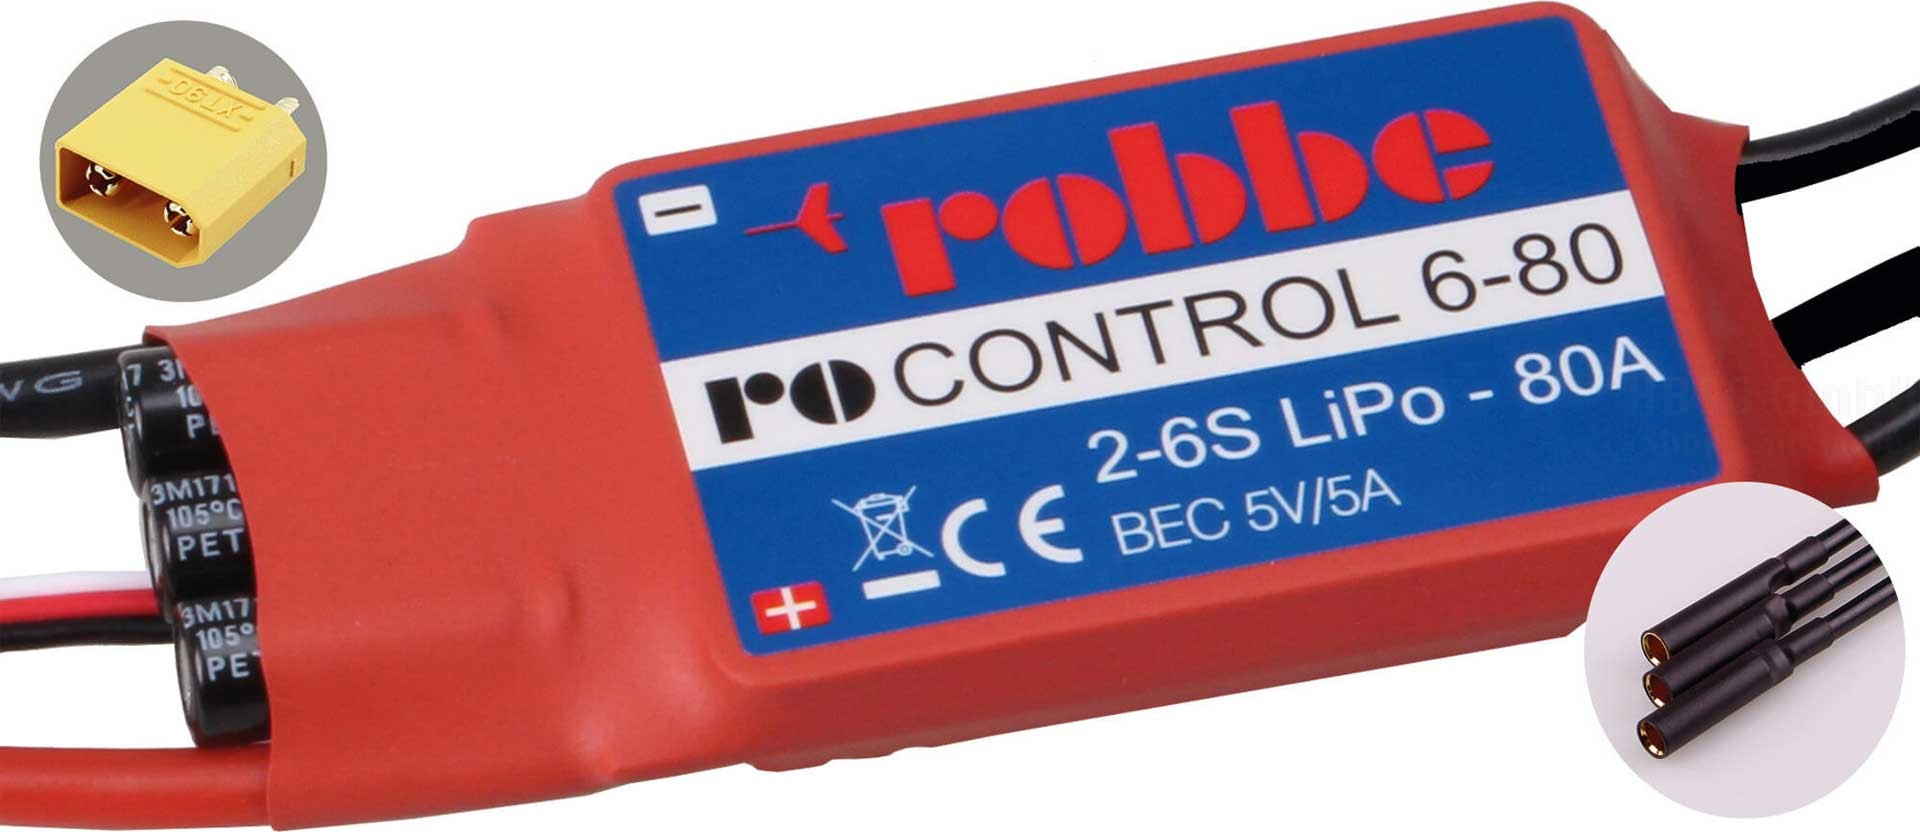 Robbe Modellsport RO-CONTROL 6-80 2-6S -80(100A) 5V/5A SWITCH BE